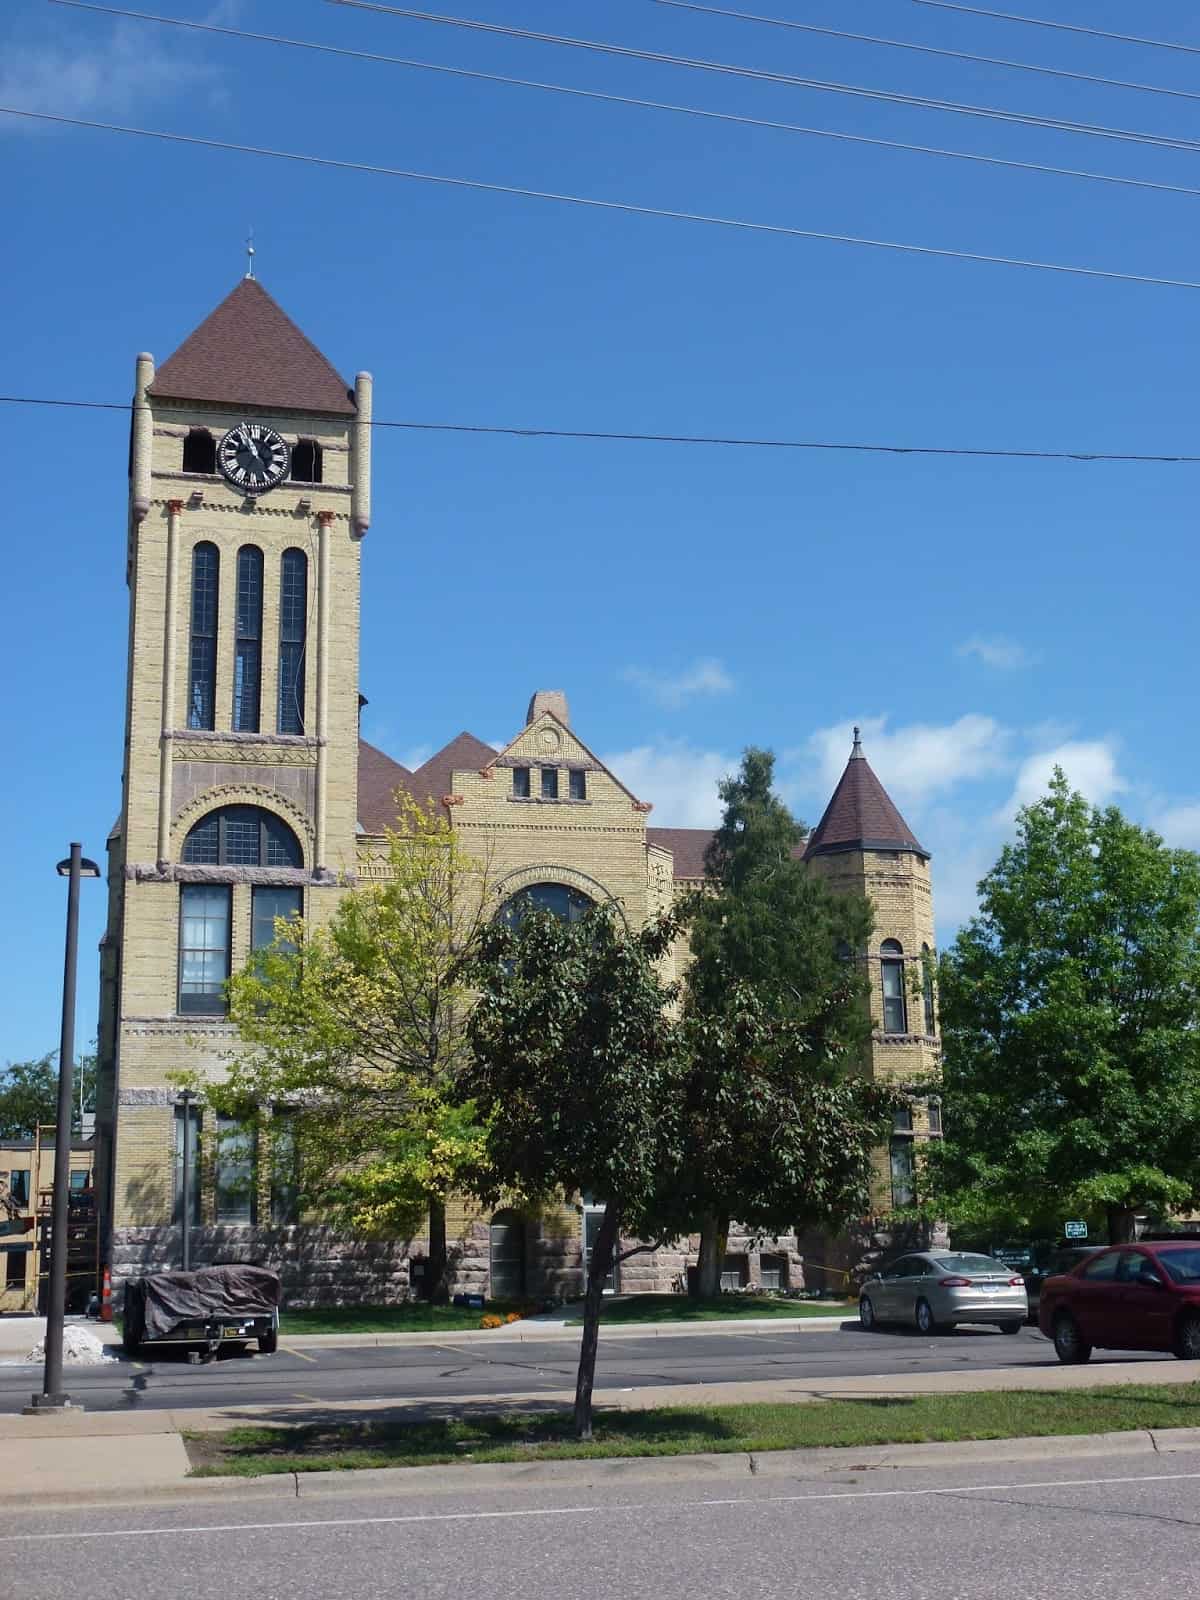 Morrison County Courthouse in Little Falls, Minnesota